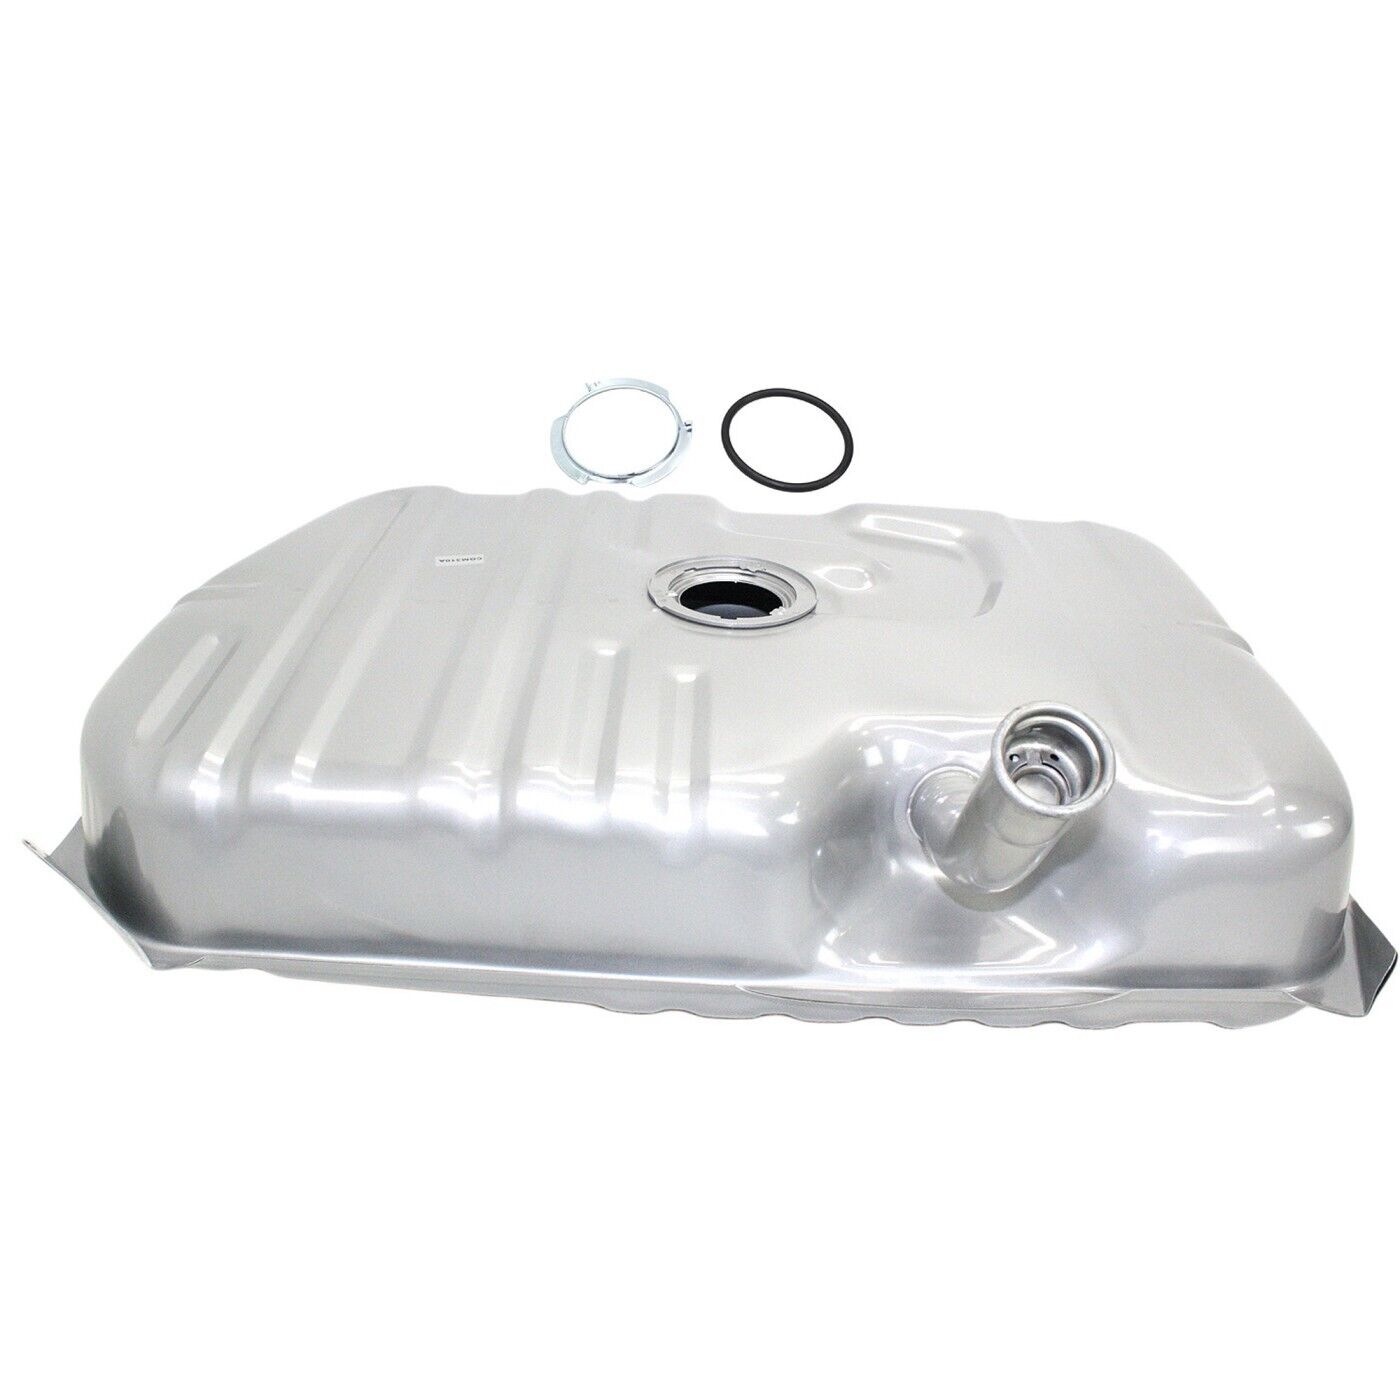 17 Gallon Fuel Gas Tank For 1978-1980 Oldsmobile Cutlass With Lock Ring 559452